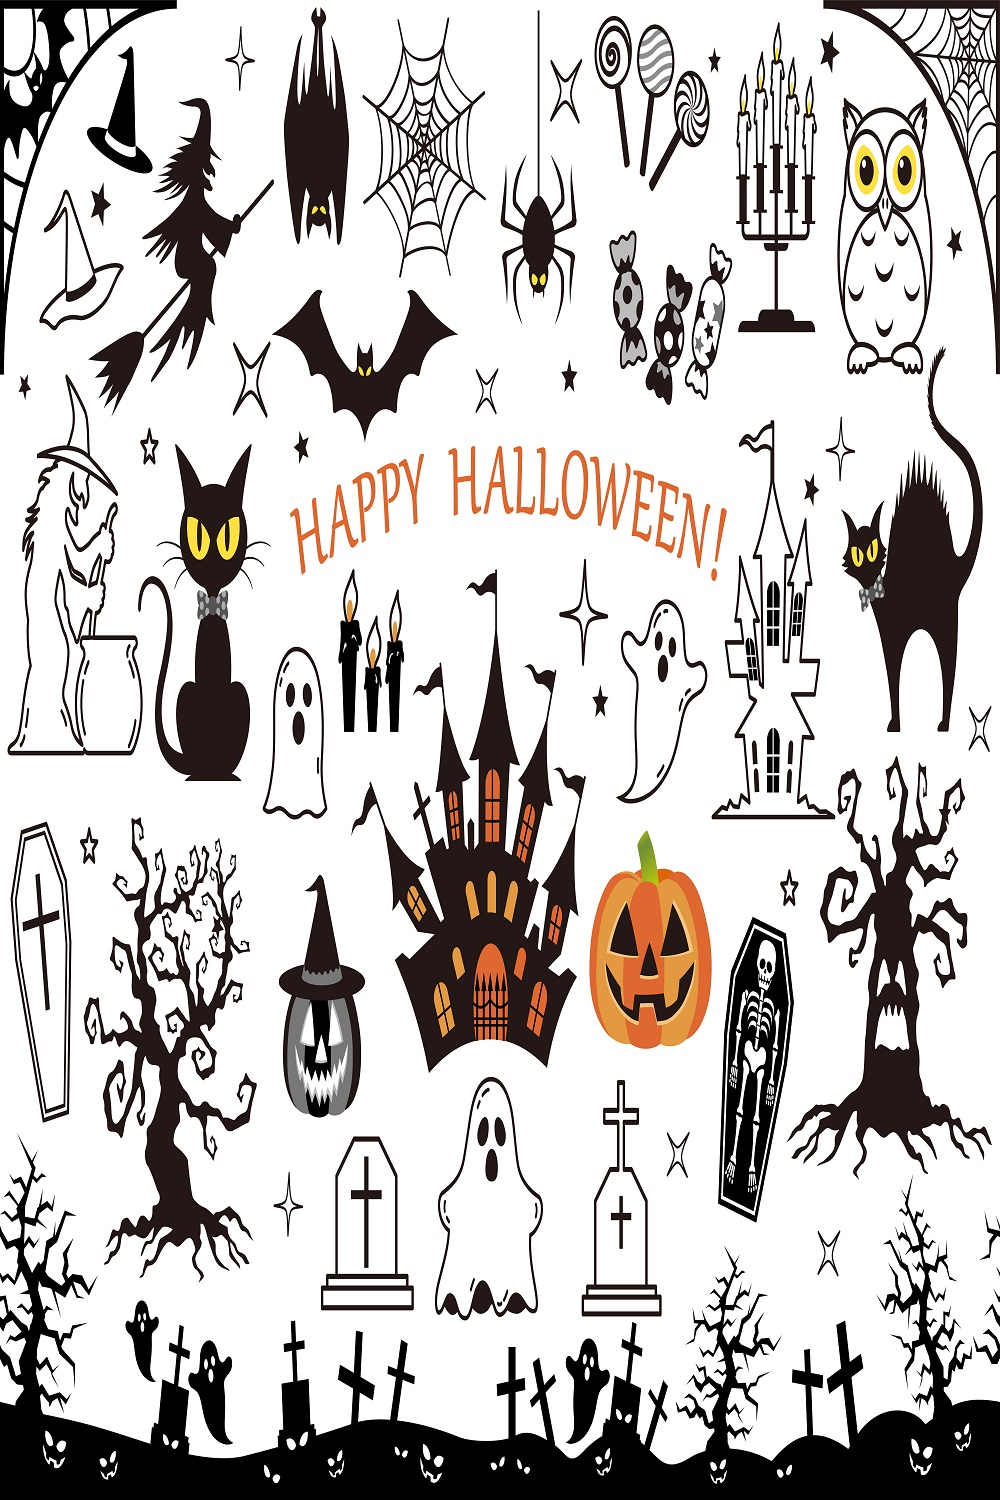 Happy Halloween vector design element set isolated white background pinterest preview image.